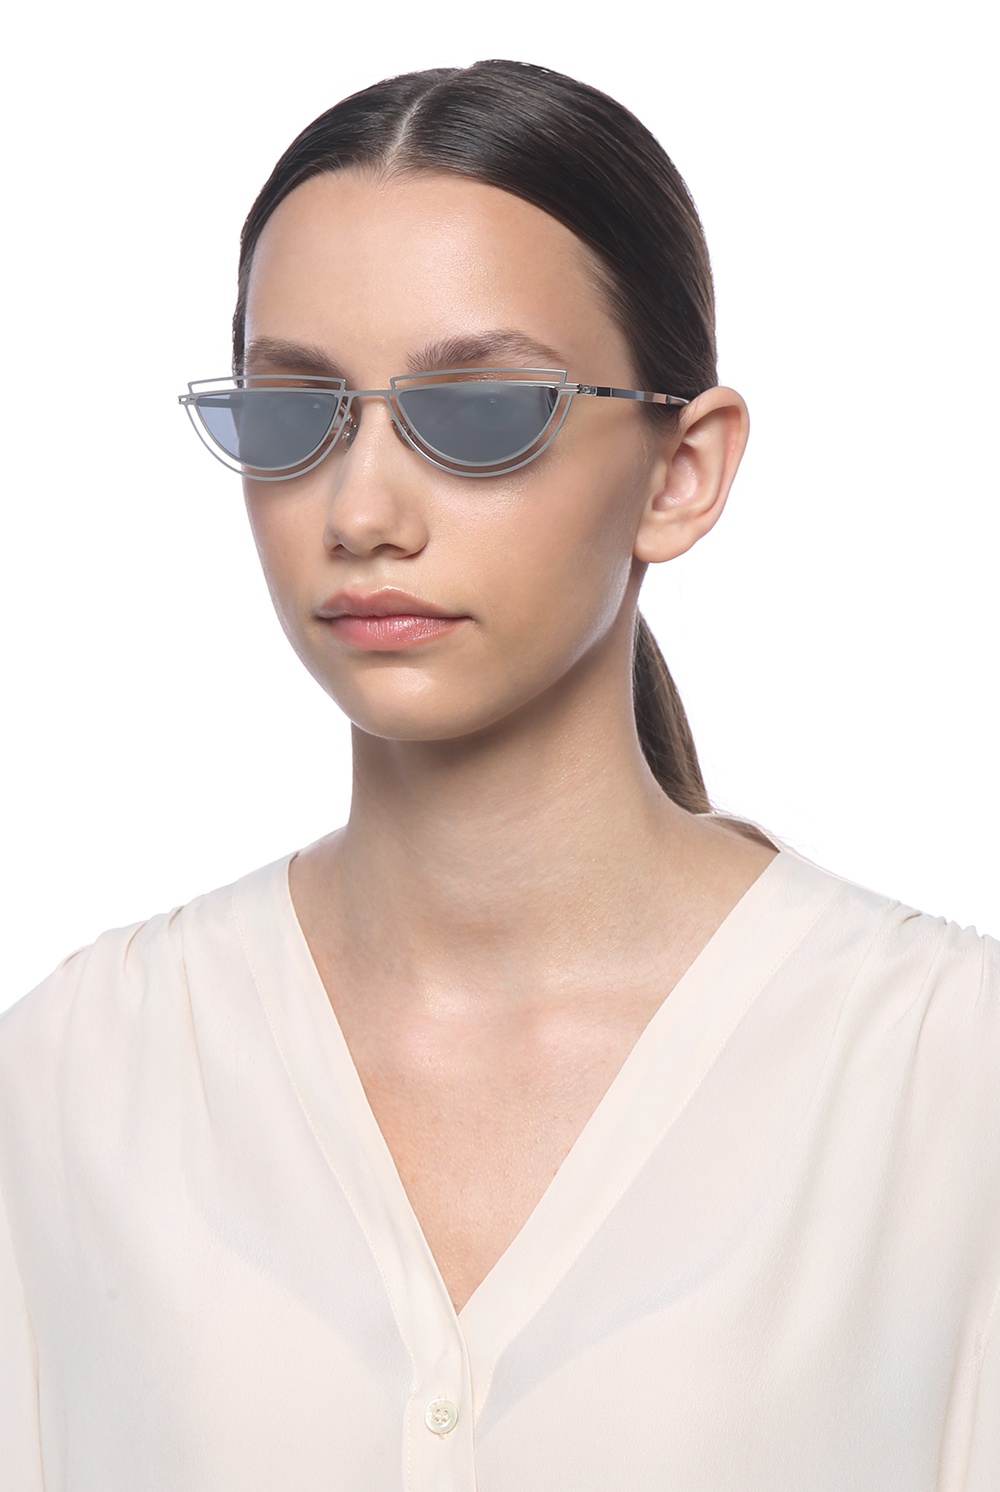 Mykita Download the updated version of the app